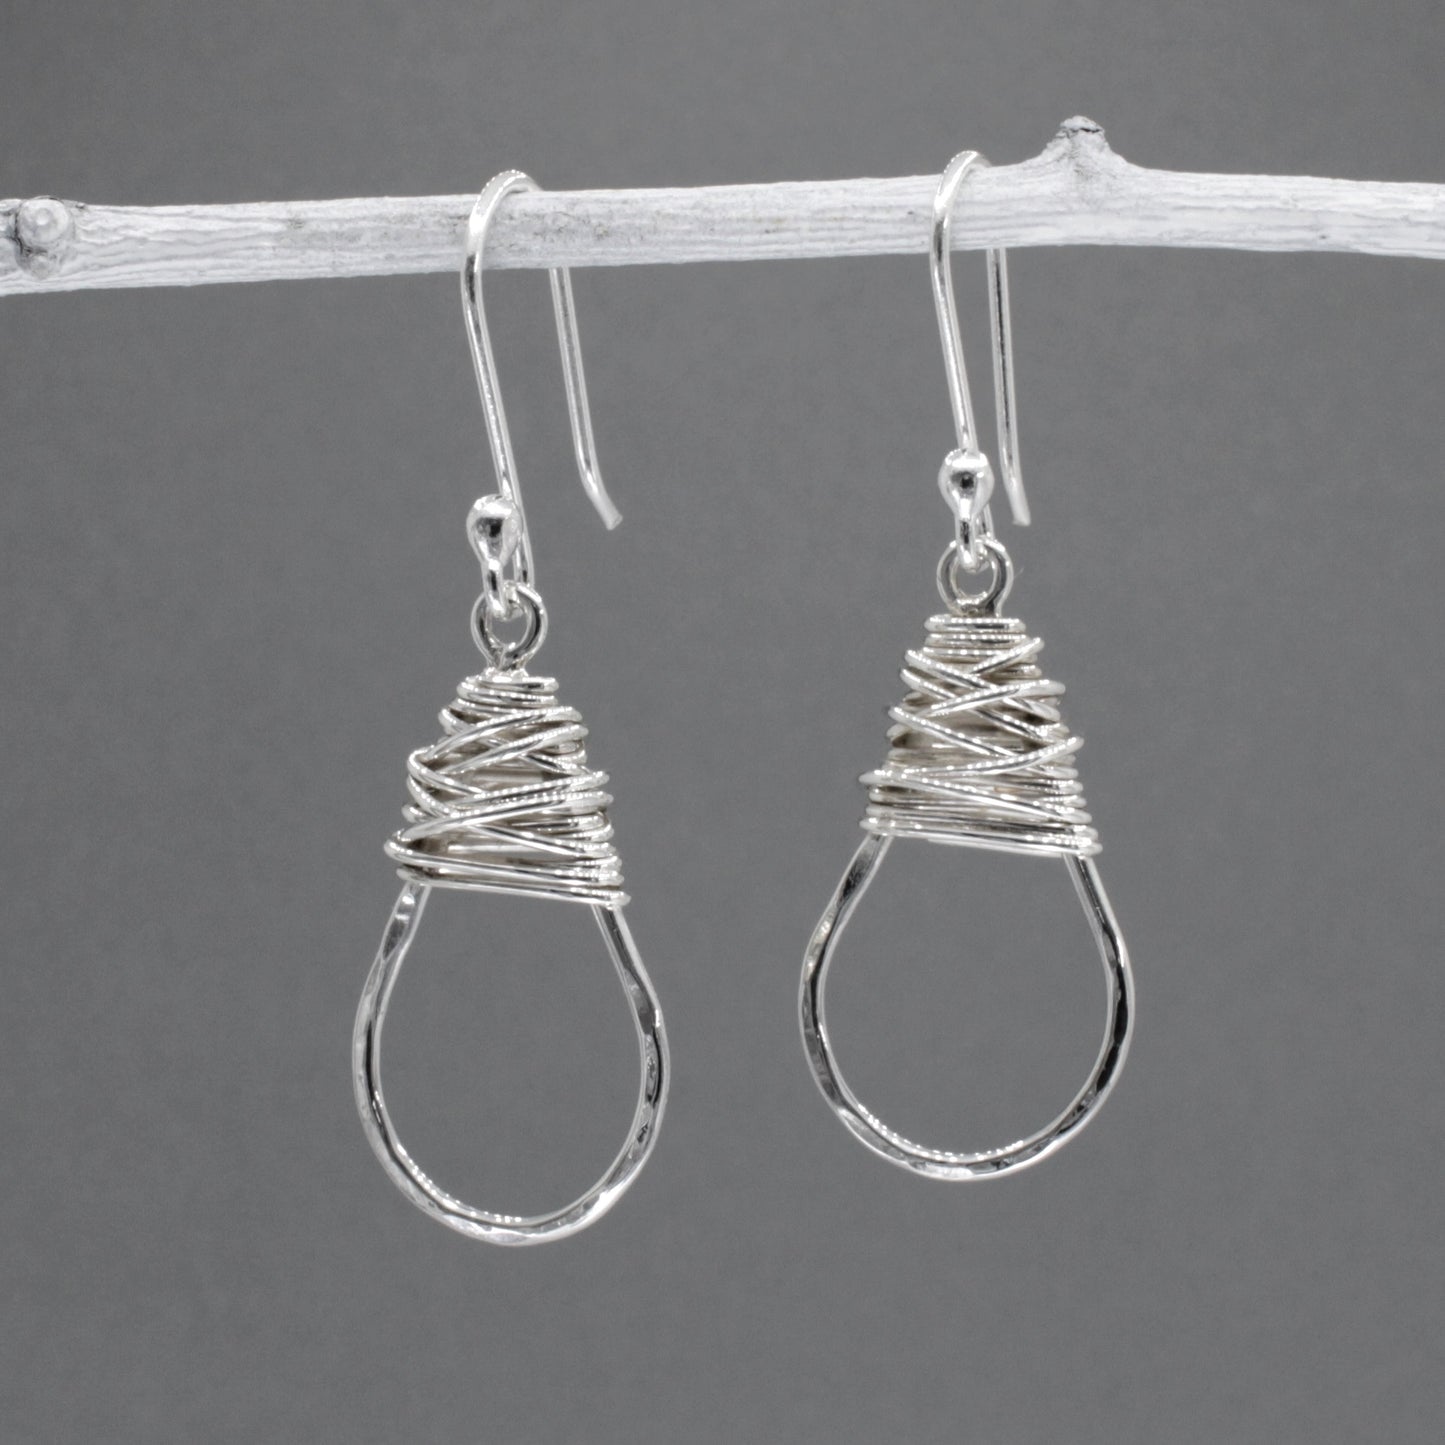 A timeless style, these Saha - Small Oval & Wire Wrap Silver Dangle Earrings will bring a touch of sparkle to any look. These beautifully crafted silver earrings feature delicate wire wrap, a slightly hammered square design, and a small oval shape, all coming together to create a dazzling accessory for any special occasion! Measuring 44mm from the top of the ear wire, and standing 30mm long and 16mm wide, these earrings are a perfect fit for any look.